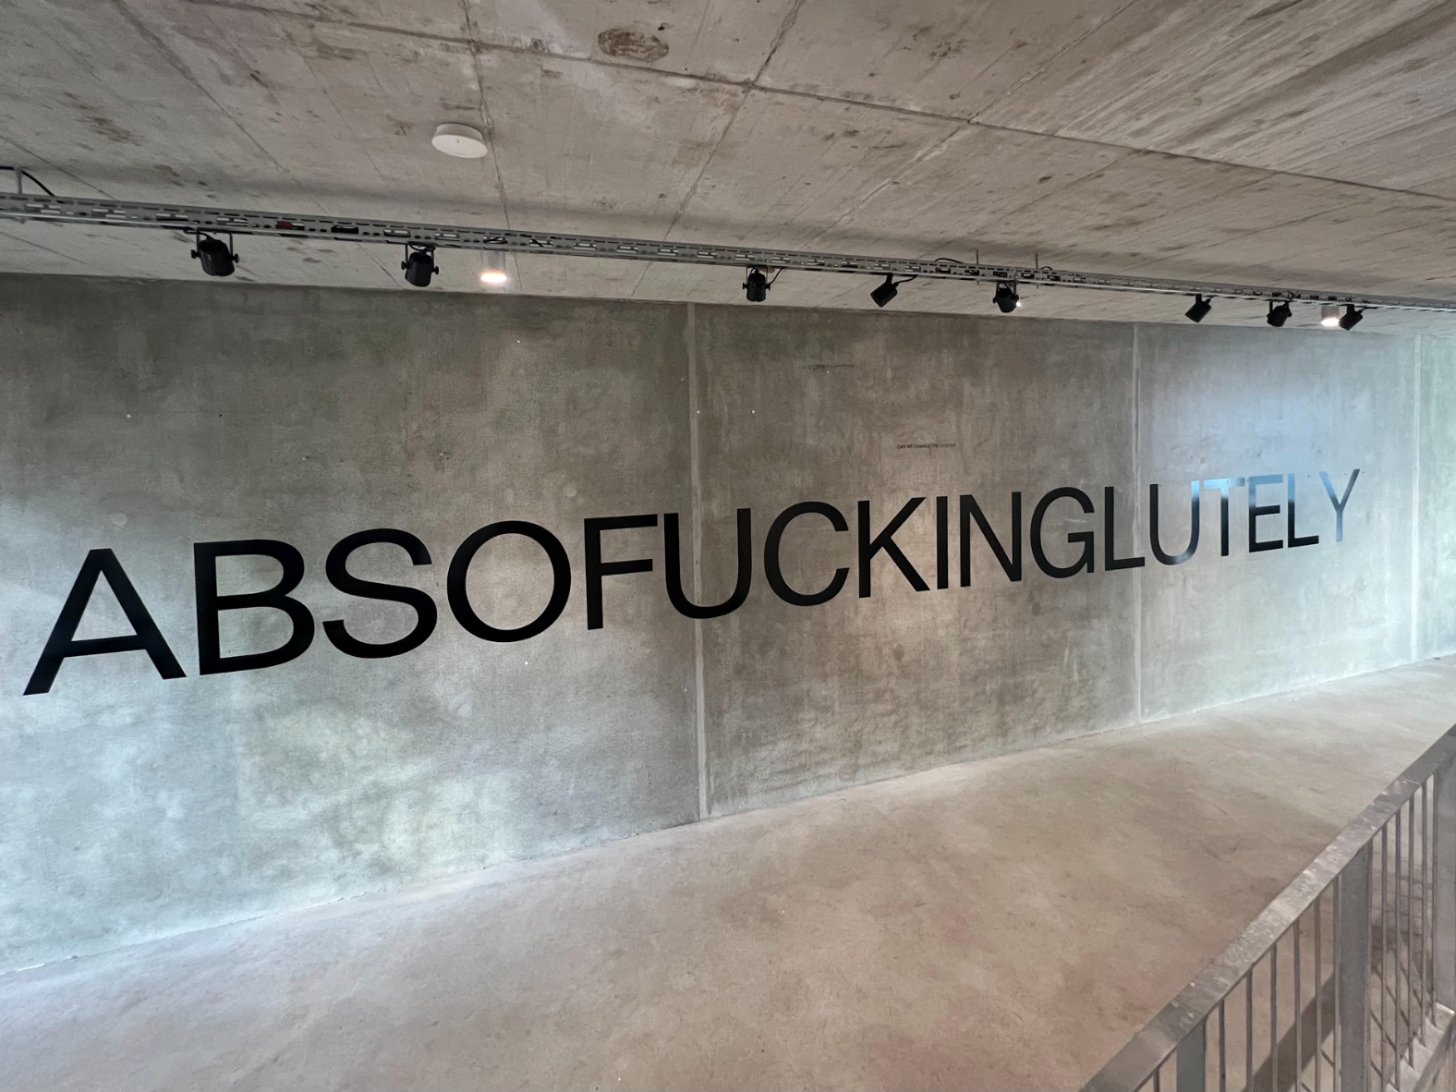   Ahmet Öğüt   Can We Change to System? Absofuckinglutely,   2022  vinyl letters directly applied on wall 800cm x 58cm / 40cm x 2cm 